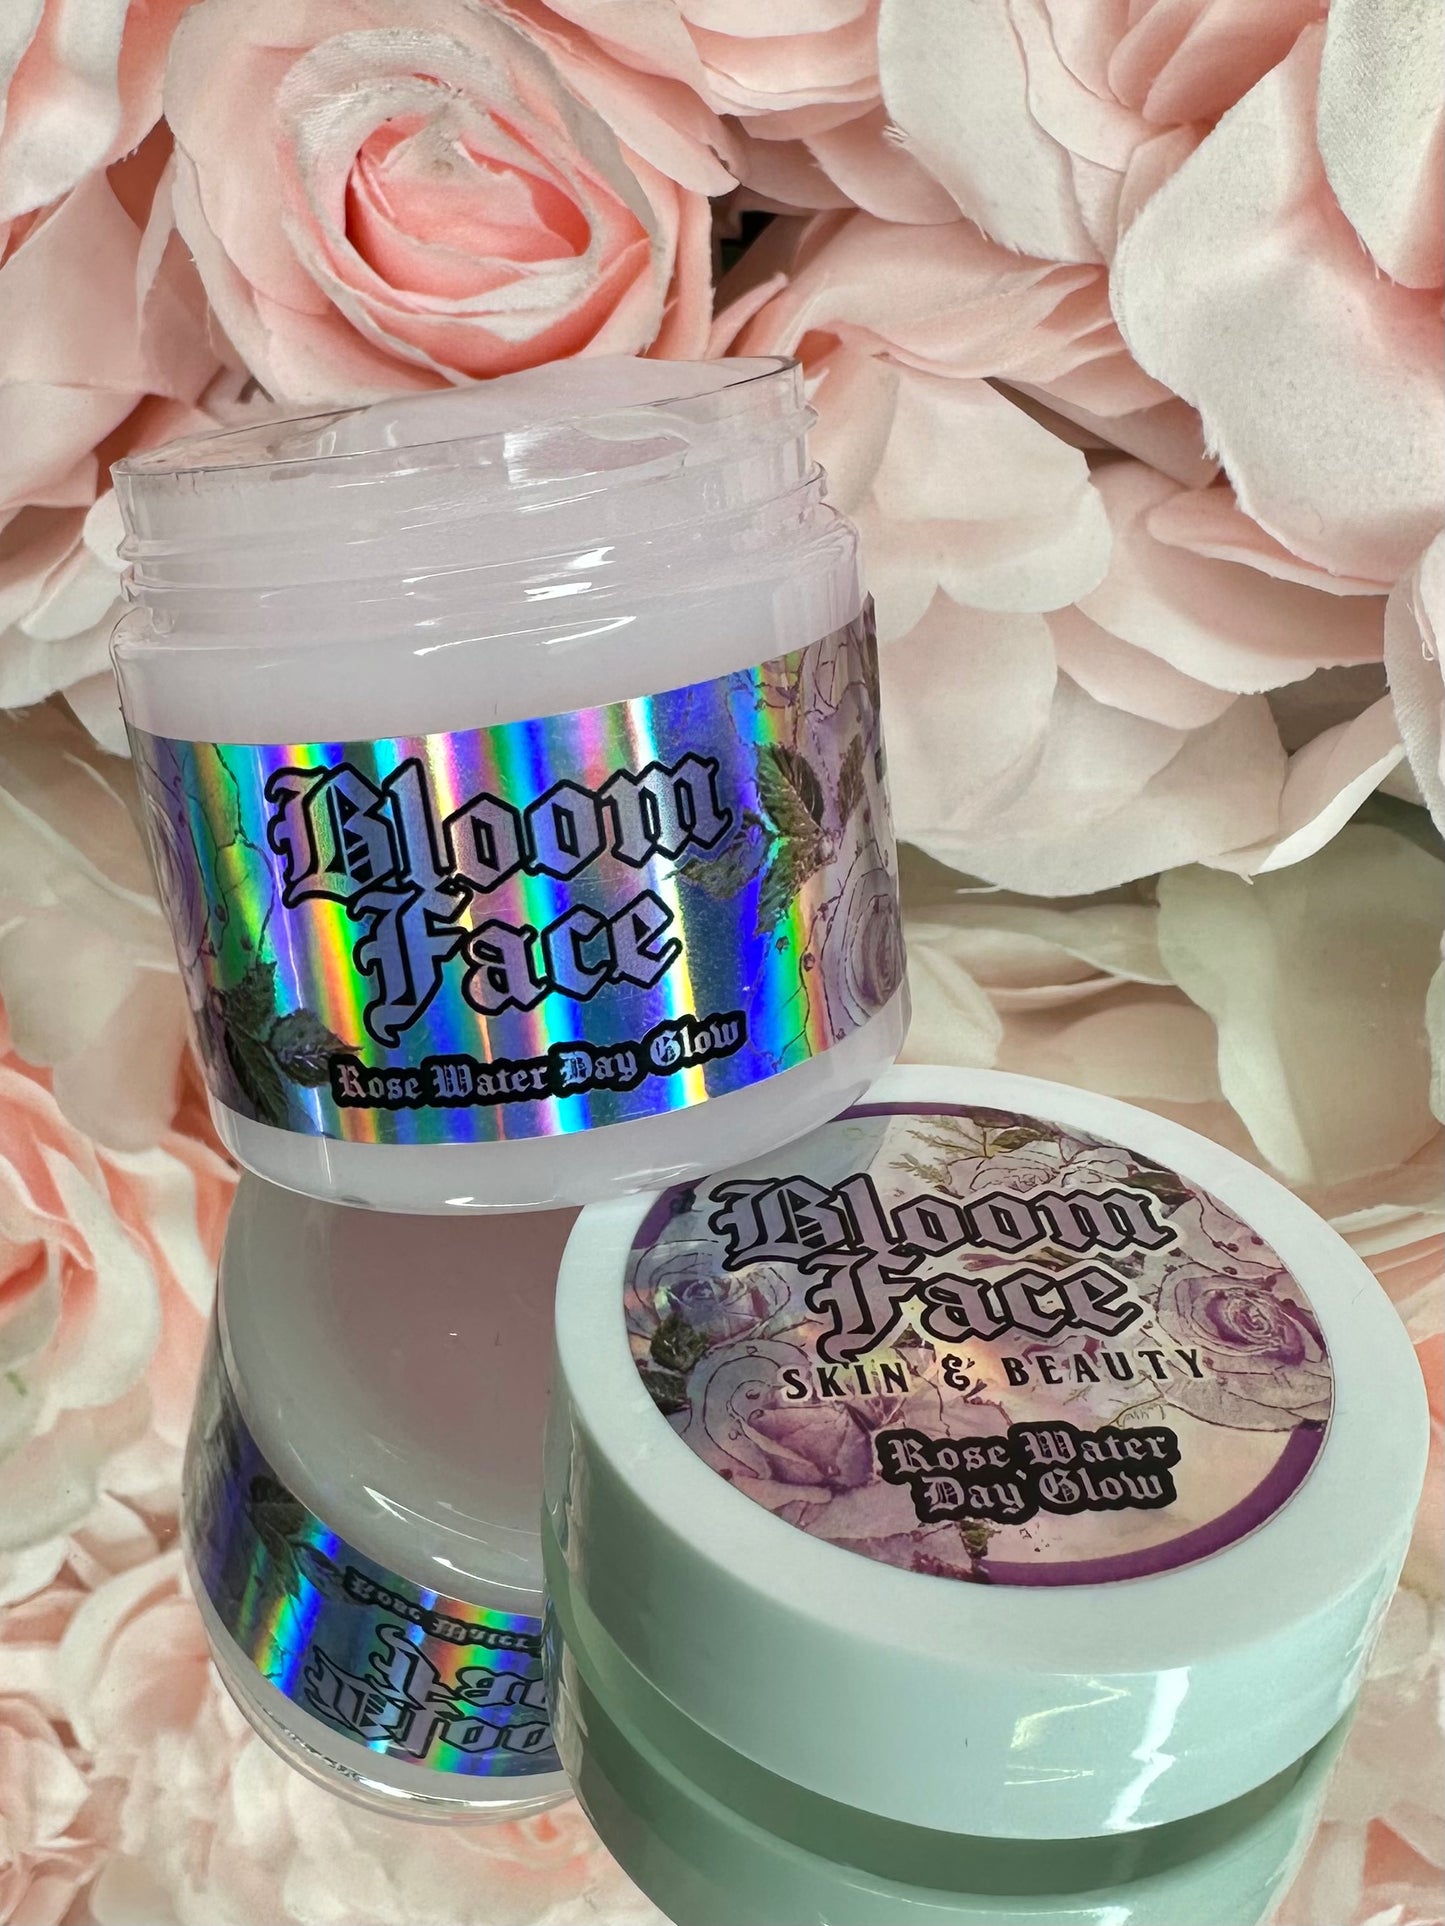 Bloomface Rose Water Day Glow